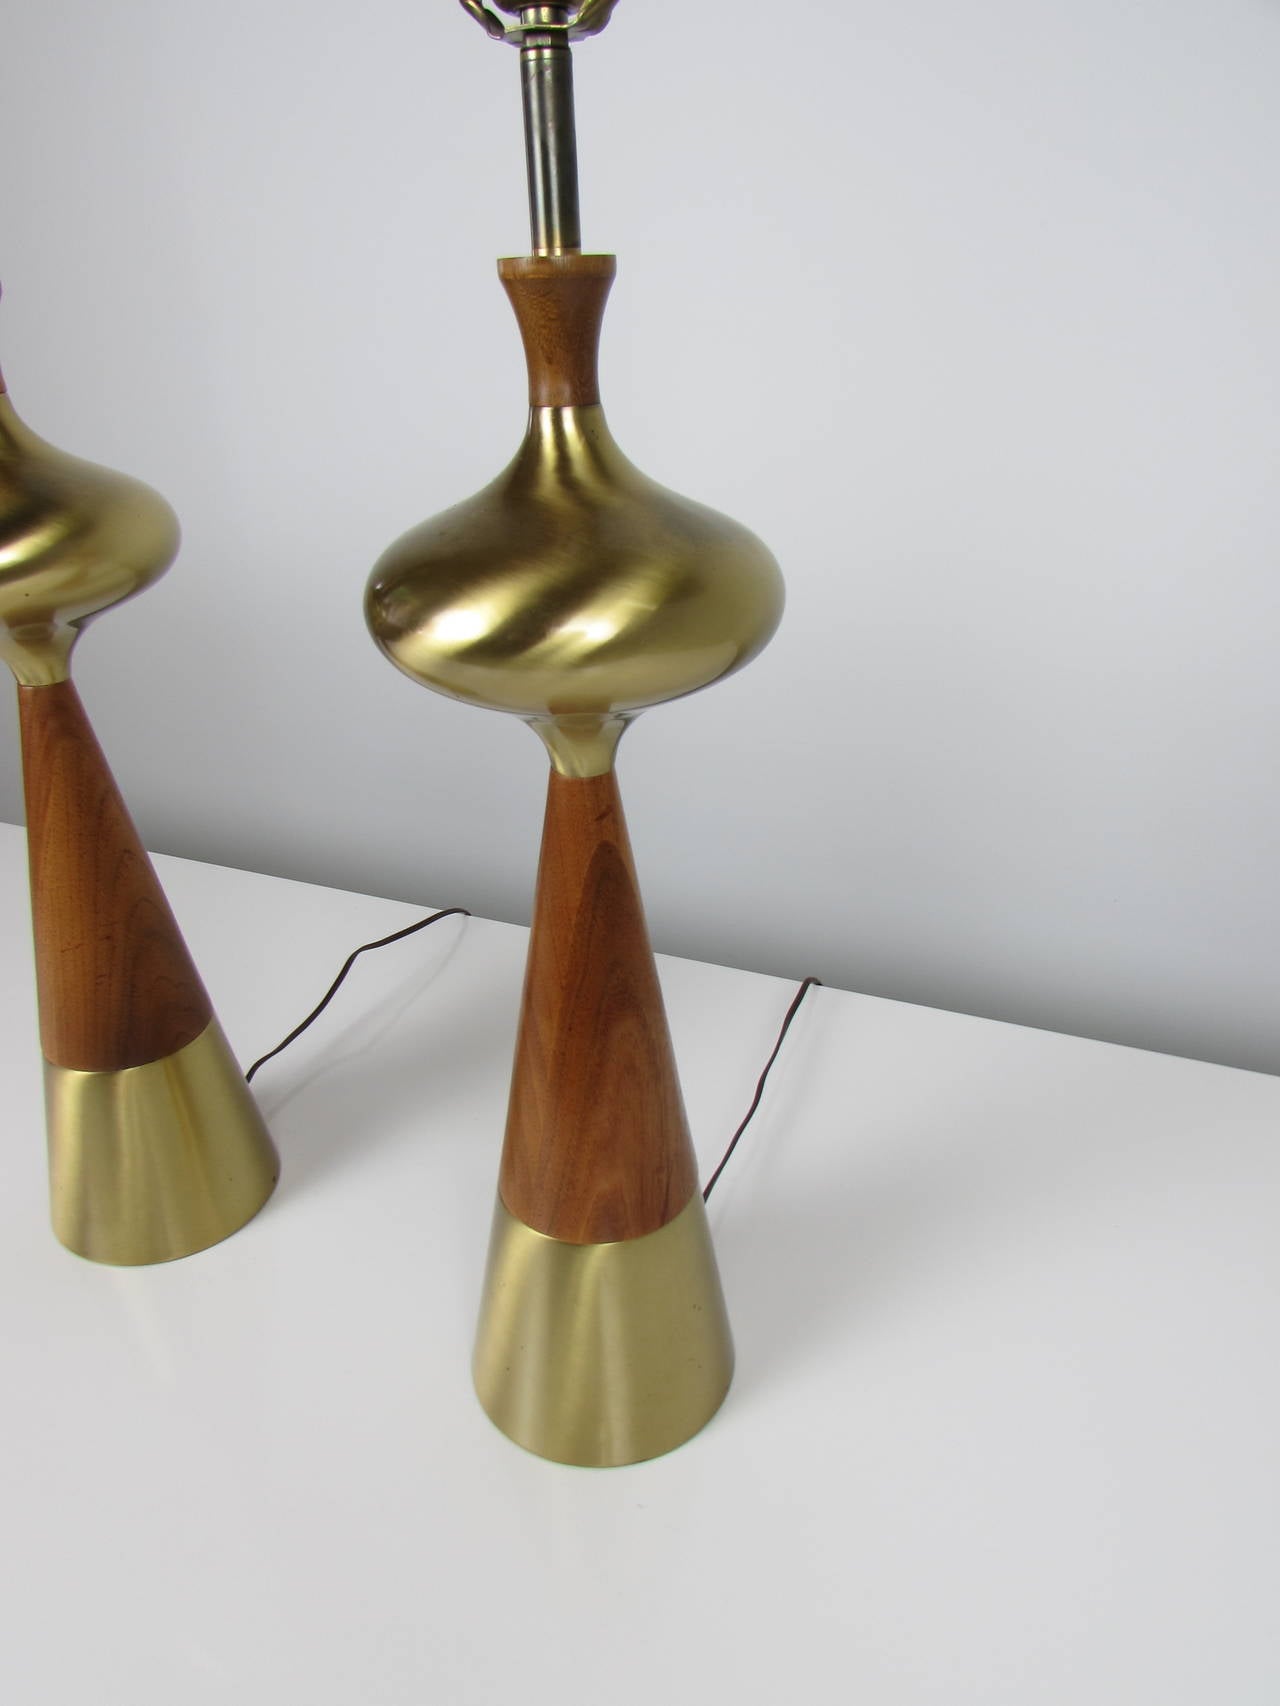 Voluptuous table lamps in walnut and brass by Tony Paul for Westwood, 1950s. These lamps are in excellent condition. 

We offer free regular deliveries to NYC and Philadelphia area. Delivery to DC, MD, CT and MA are available if schedule permits,